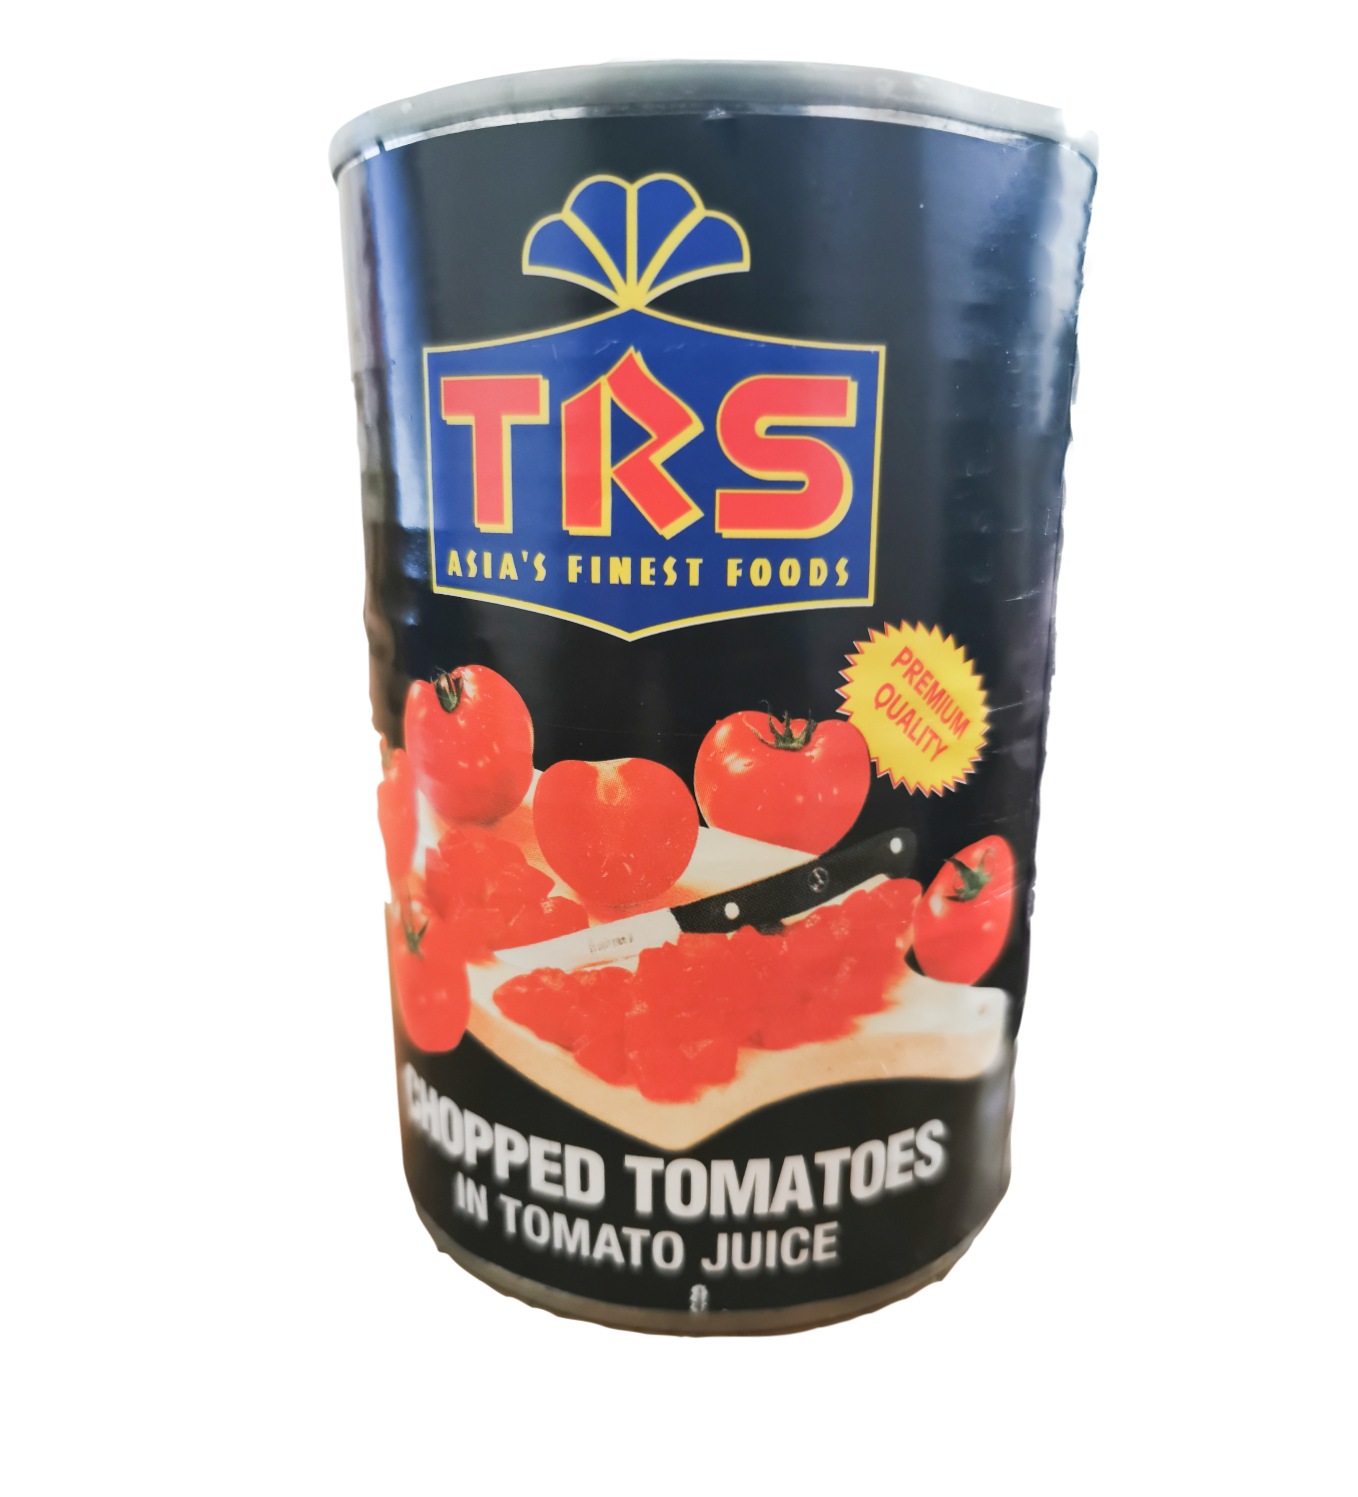 TRS Chopped Tomatoes in Tomato Juice